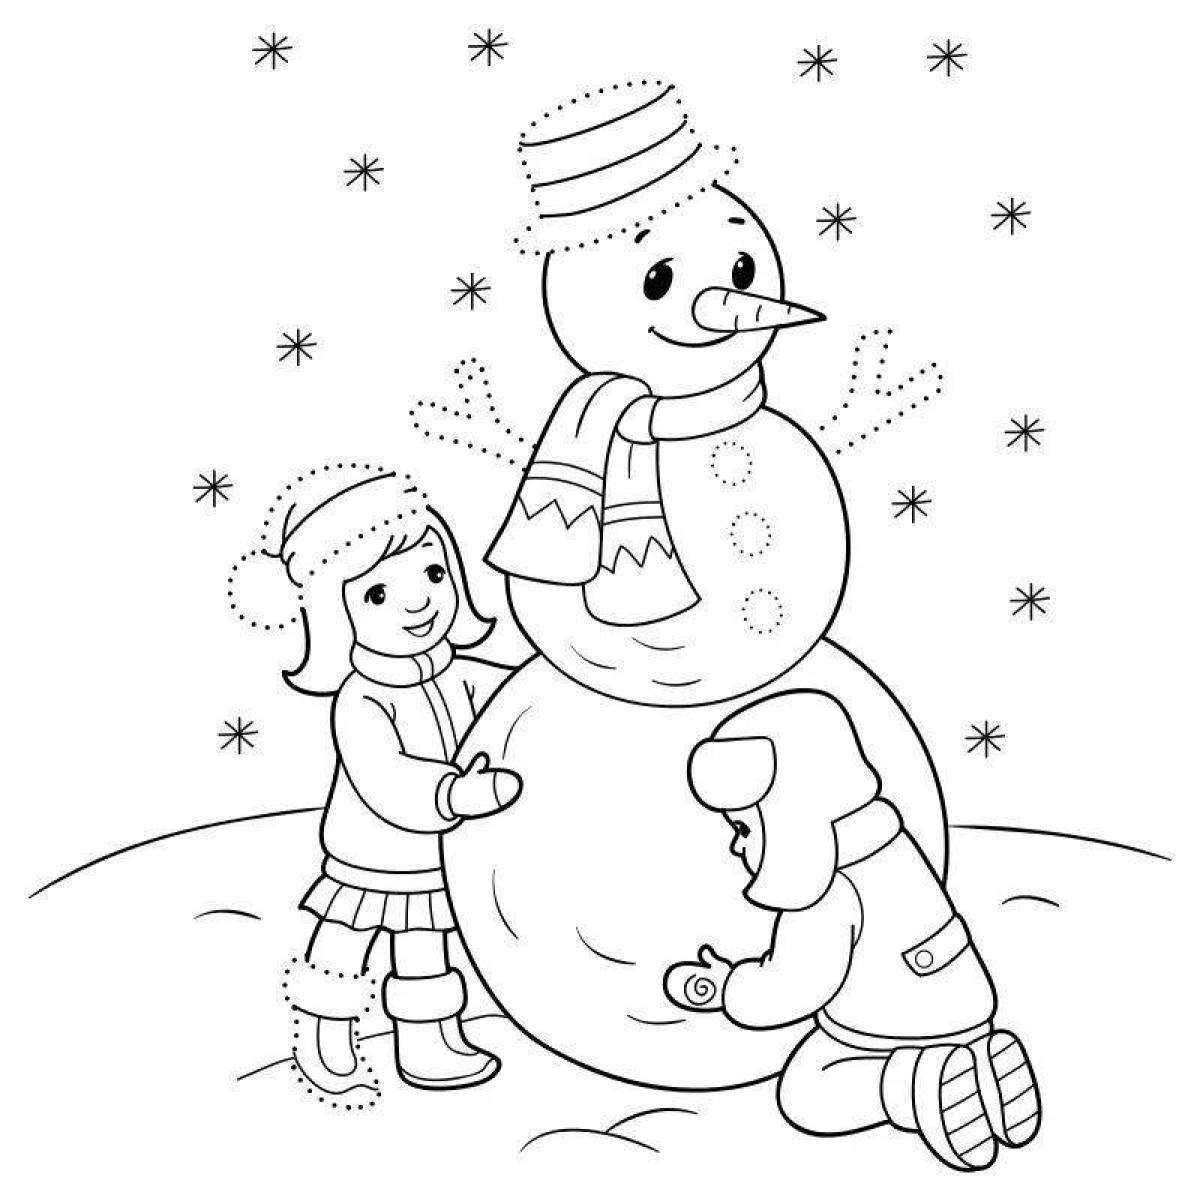 Humorous coloring book snowman for children 6-7 years old